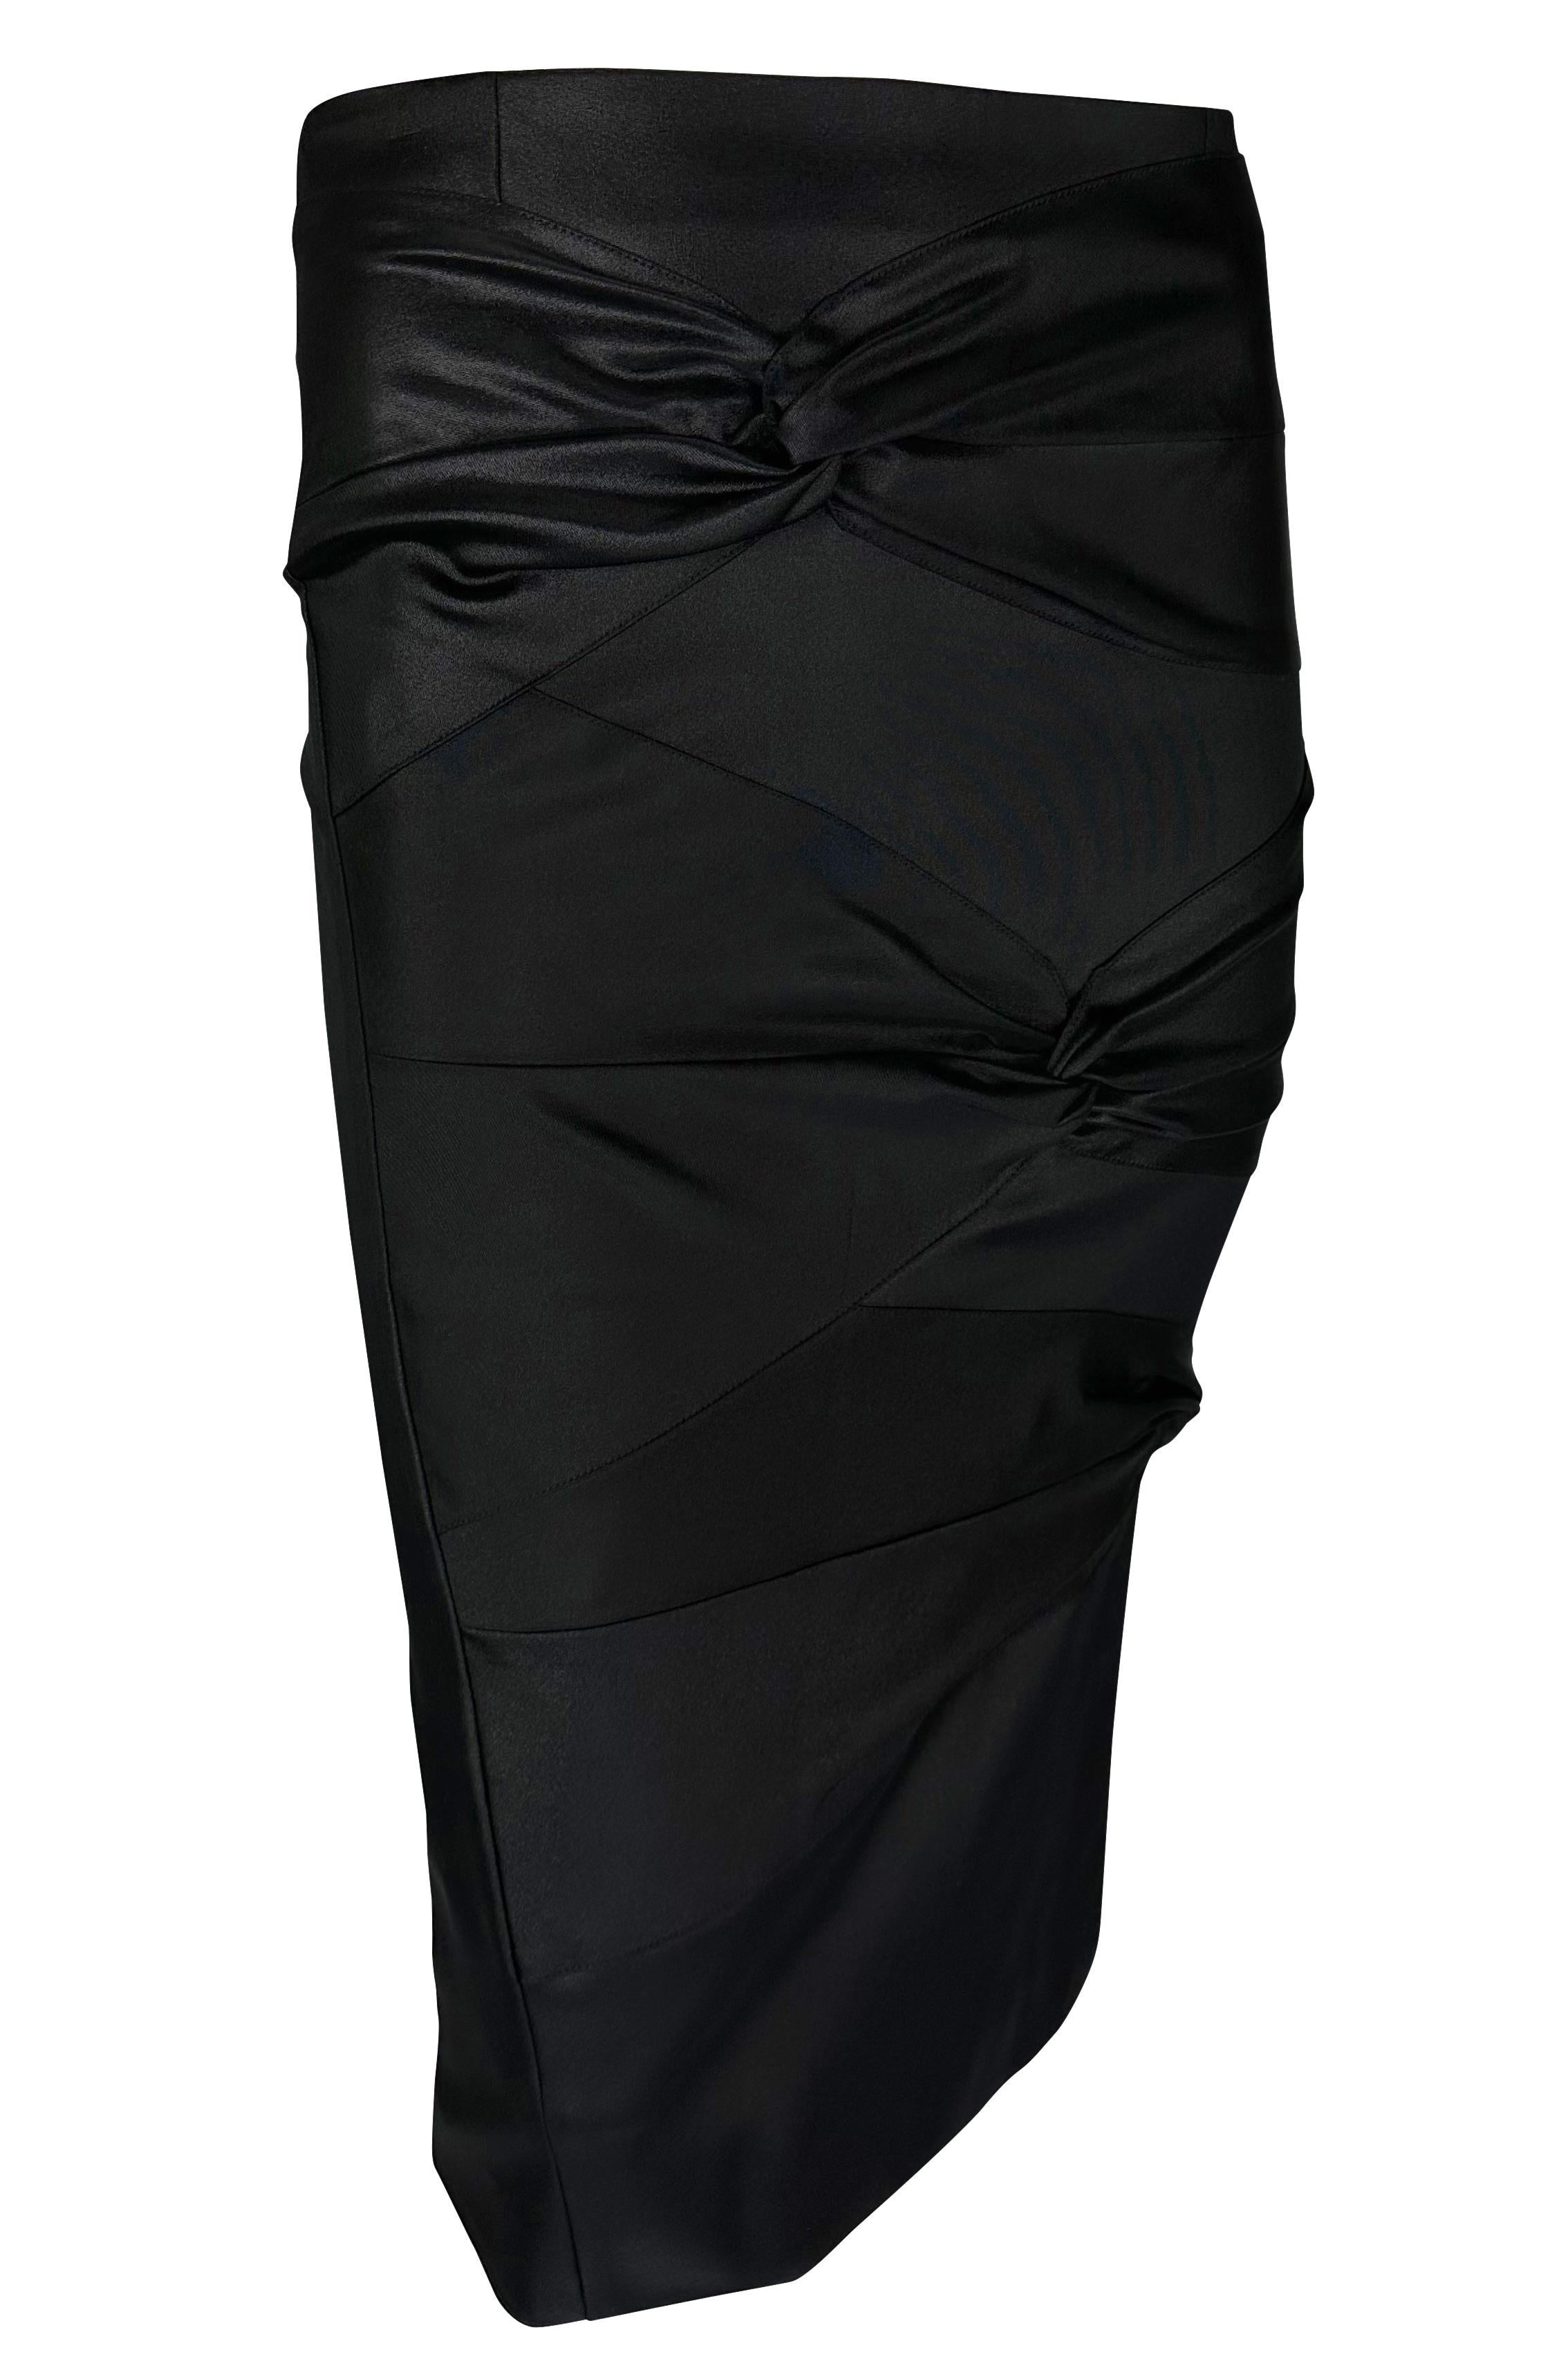 F/W 2003 Christian Dior by John Galliano Tie Accent Bodycon Stretch Skirt For Sale 3